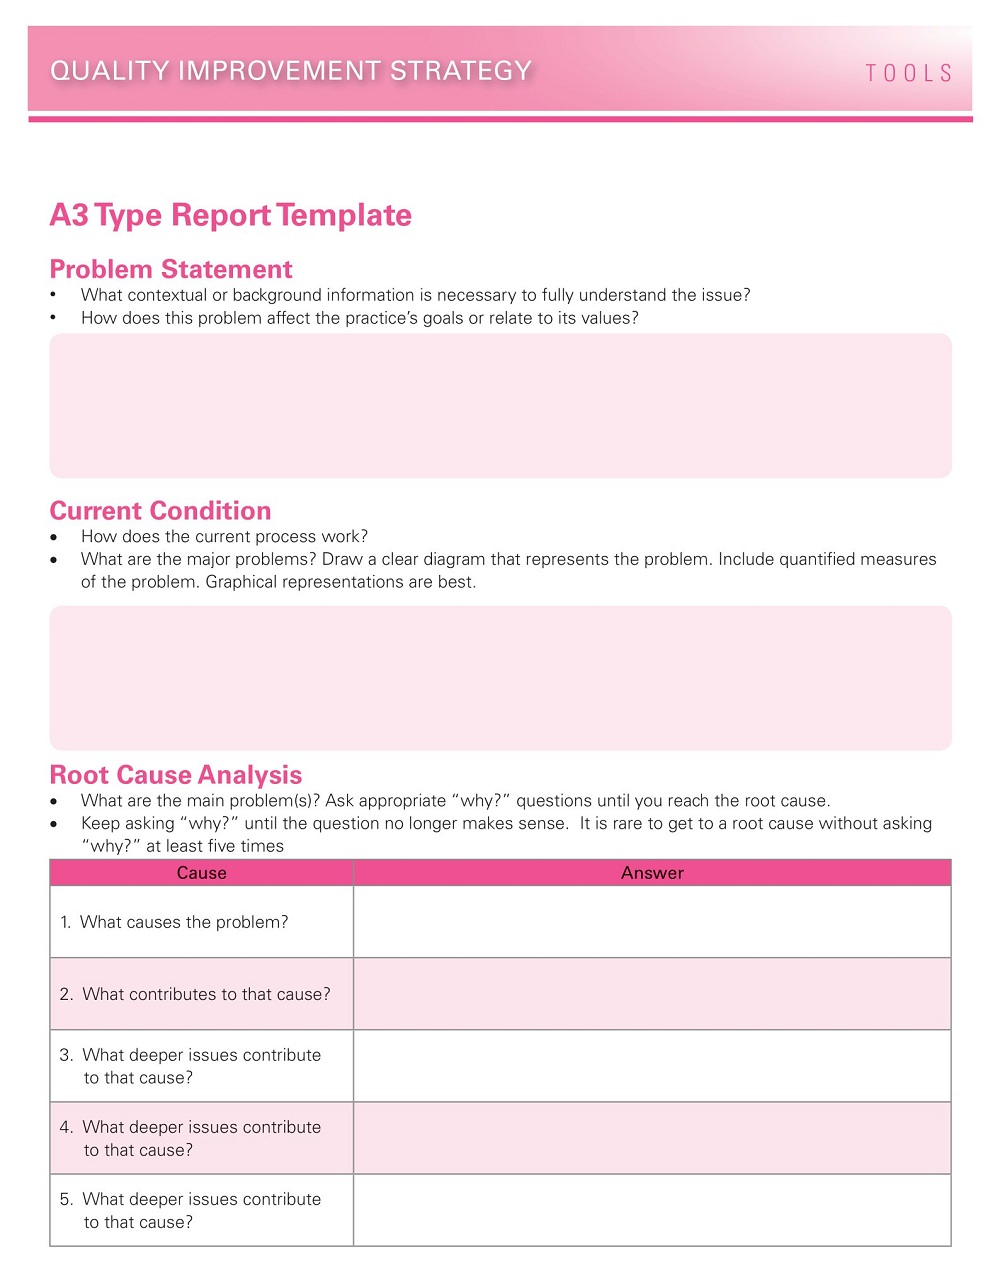 A3 Type Report Template